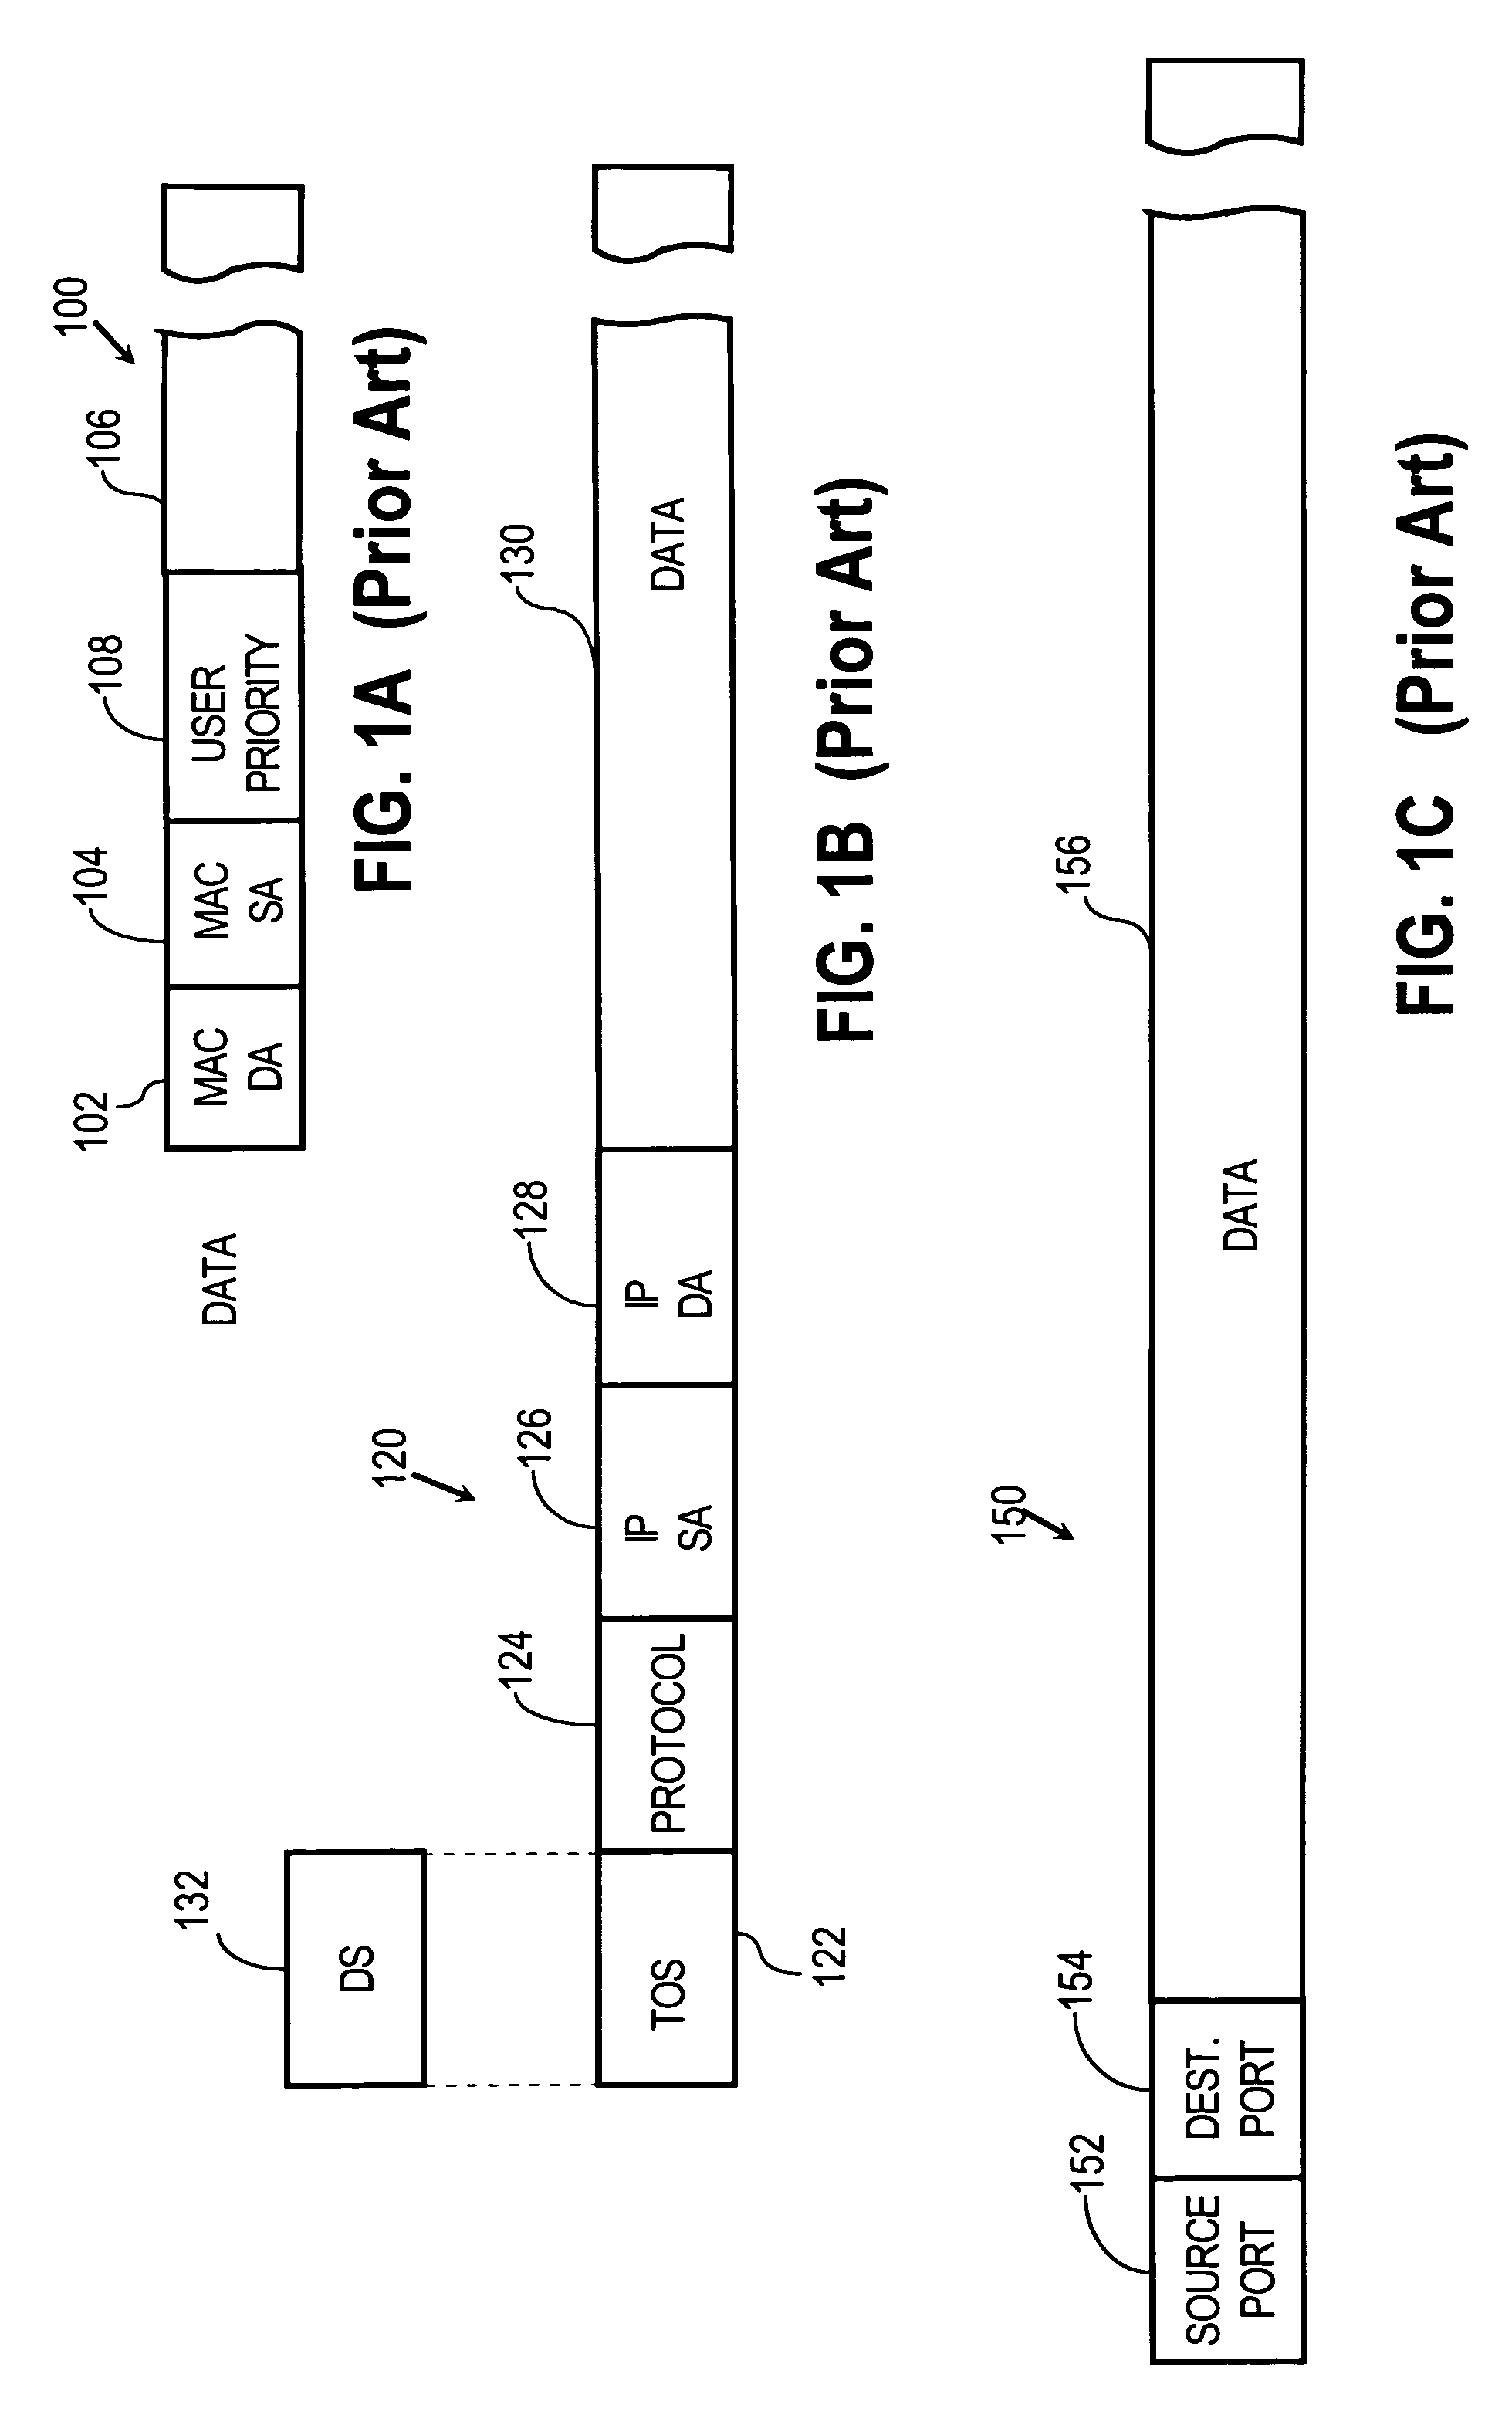 Method and apparatus for creating policies for policy-based management of quality of service treatments of network data traffic flows